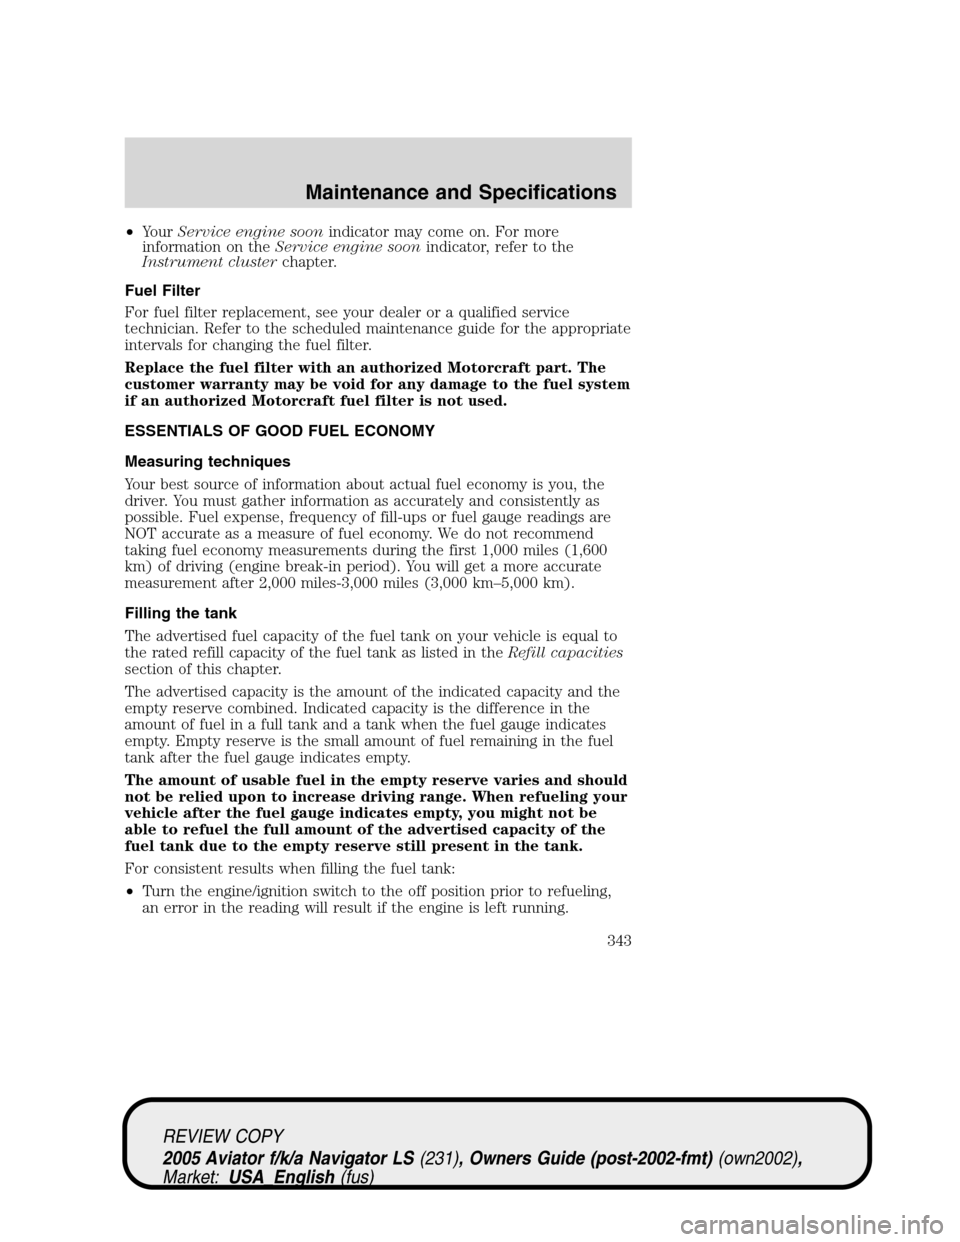 LINCOLN AVIATOR 2005 Service Manual •YourService engine soonindicator may come on. For more
information on theService engine soonindicator, refer to the
Instrument clusterchapter.
Fuel Filter
For fuel filter replacement, see your deal